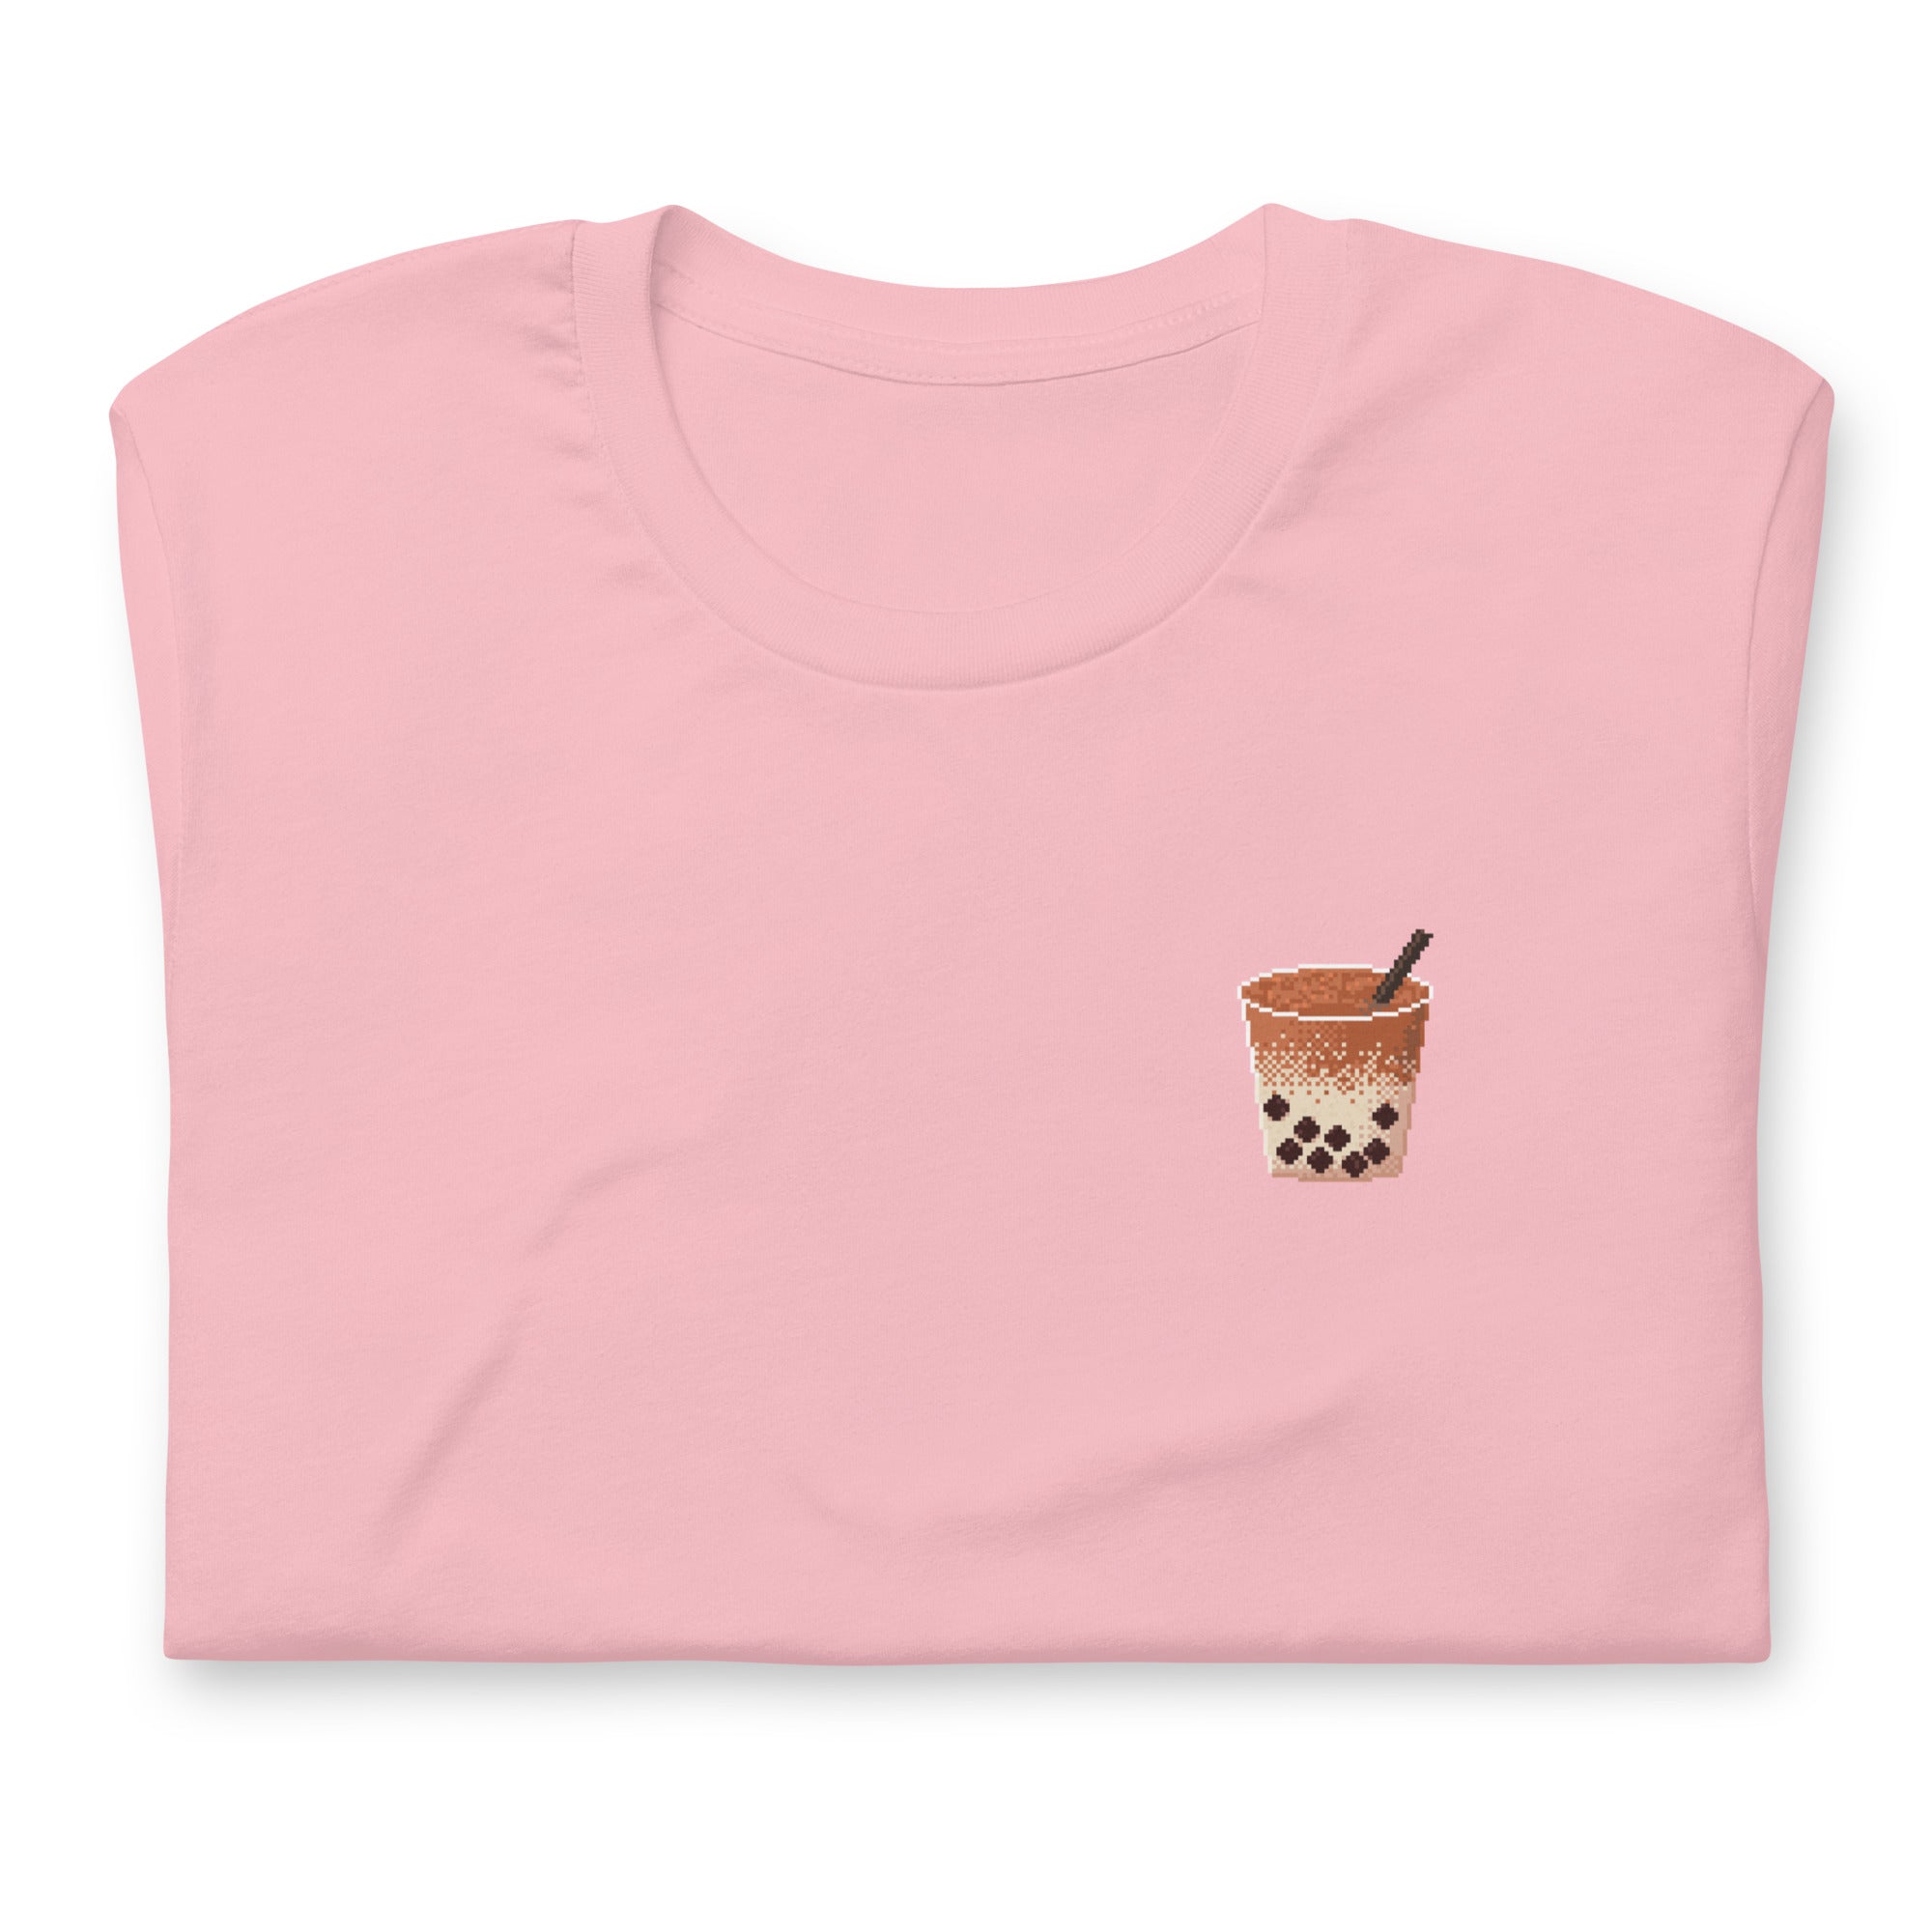 Pixel Boba | Unisex t-shirt | Cozy Gamer Threads and Thistles Inventory Pink S 